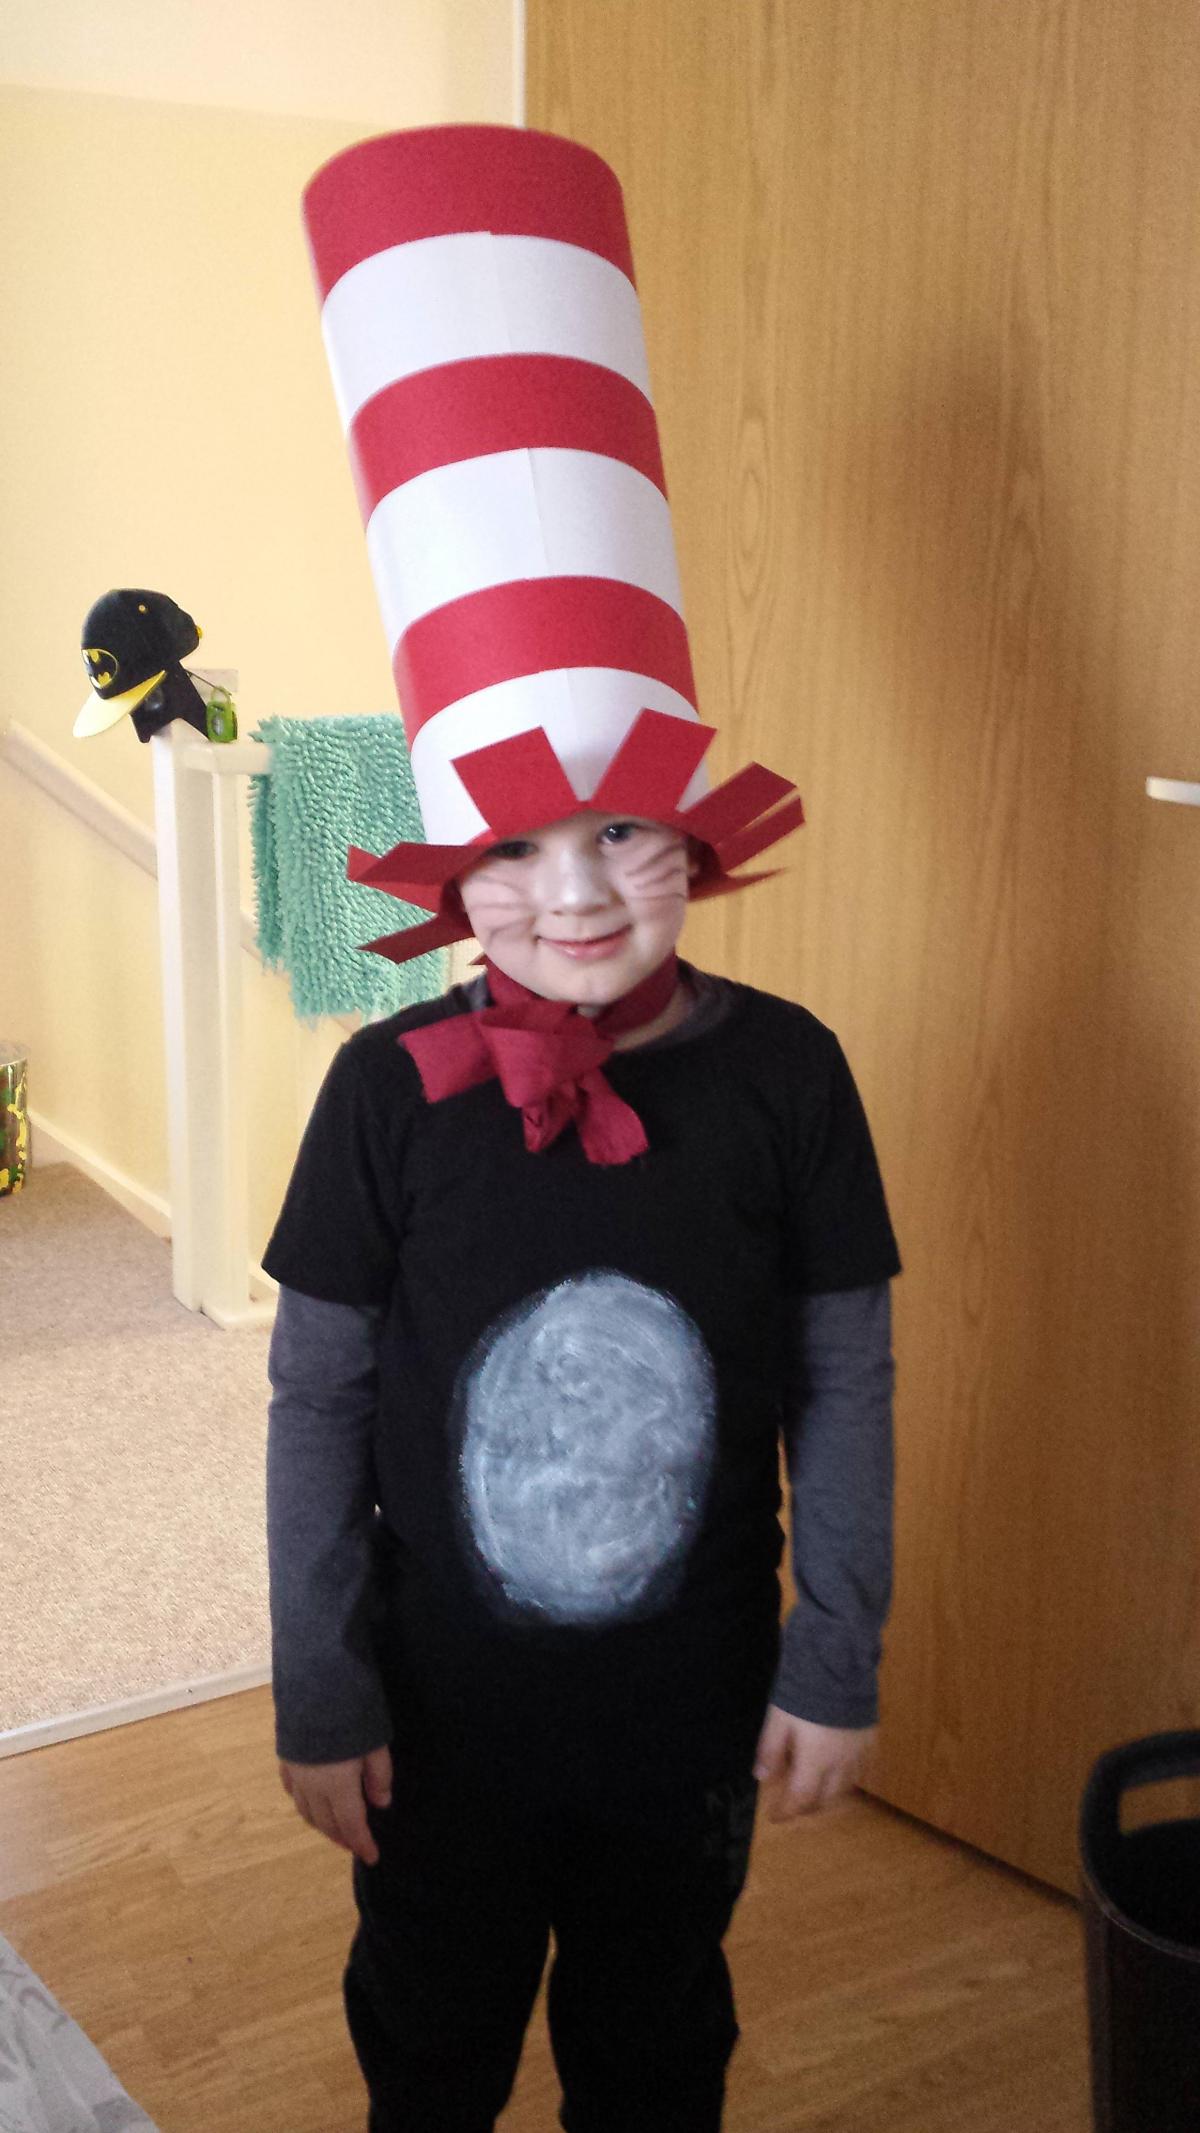 My son, Ethan Langa aged 5, Cat in the Hat.